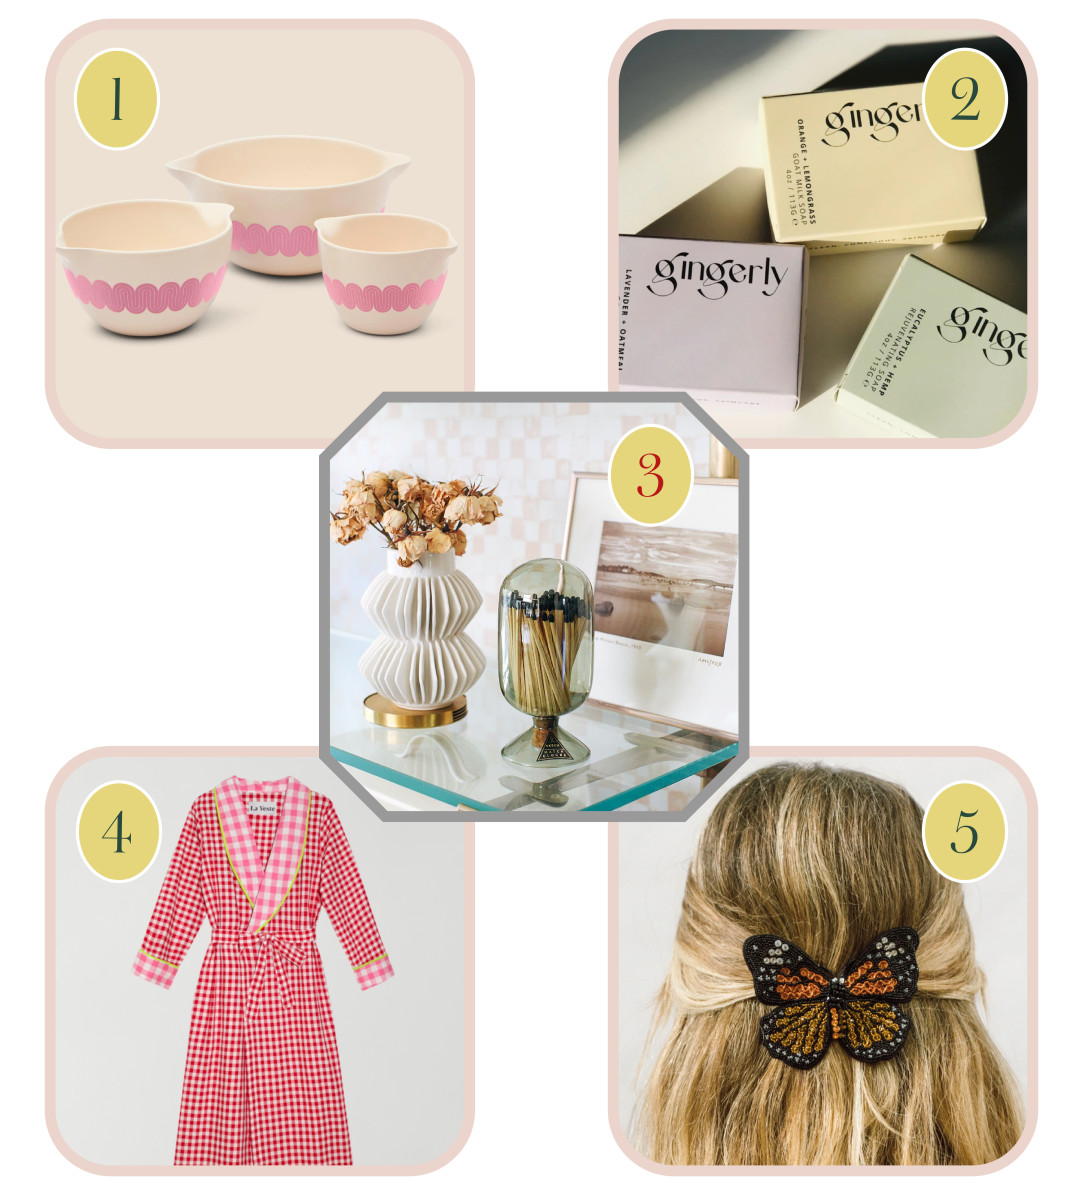 Mother's Day Gift Guides